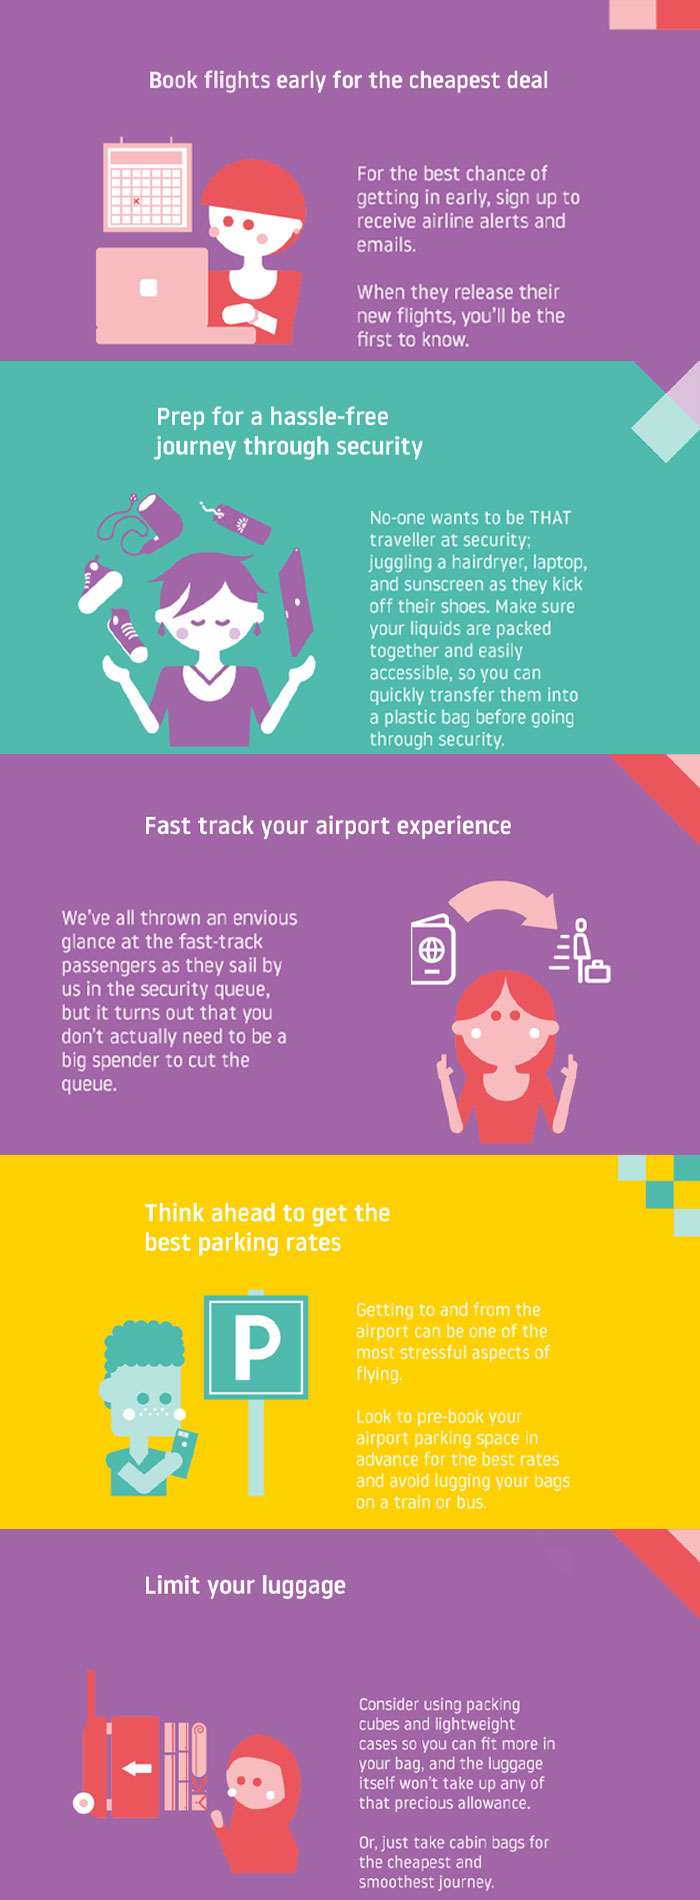 Travel Hacks That Will Save You Time And Money